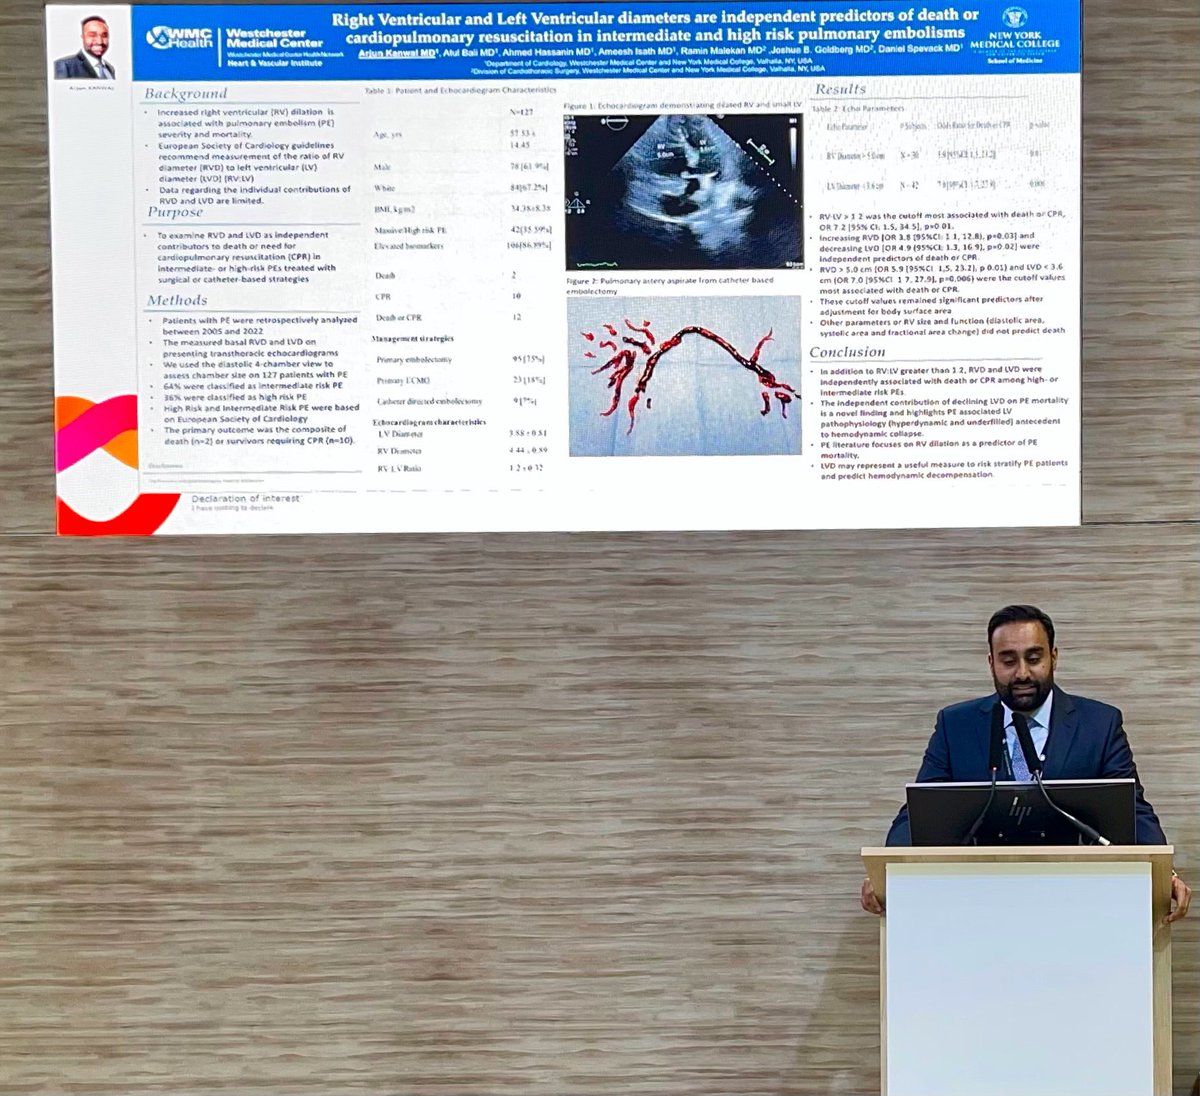 Congrats @ArjunKanwalMD for presenting our exciting data @escardio! RV & LV diameters as risk factors for mortality in high-risk PE. Adding to the evolving landscape of #PERT!👏🏽 @GoldbergJBCTMD @ameeshisath @Doc_Hassanin @SrihariNaiduMD #ESCCongress #CardioTwitter #WMCCardiology